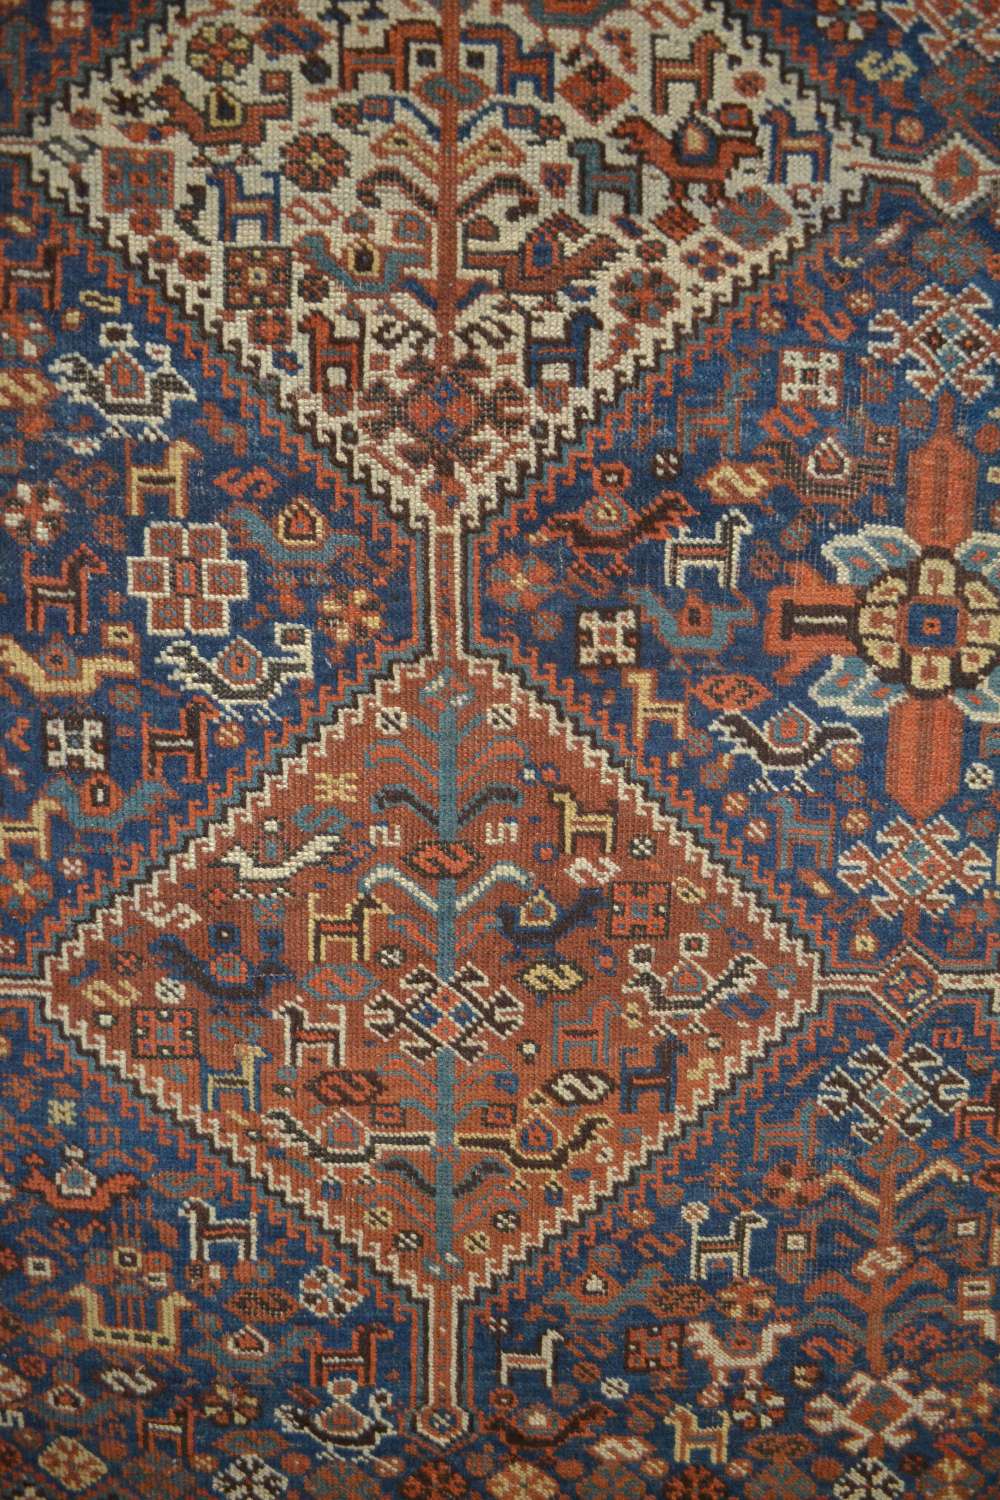 Khamseh rug, Fars, south west Persia, late 19th/early 20th century, 6ft. 6in. x 5ft. 2in. 1.98m. x - Image 6 of 6